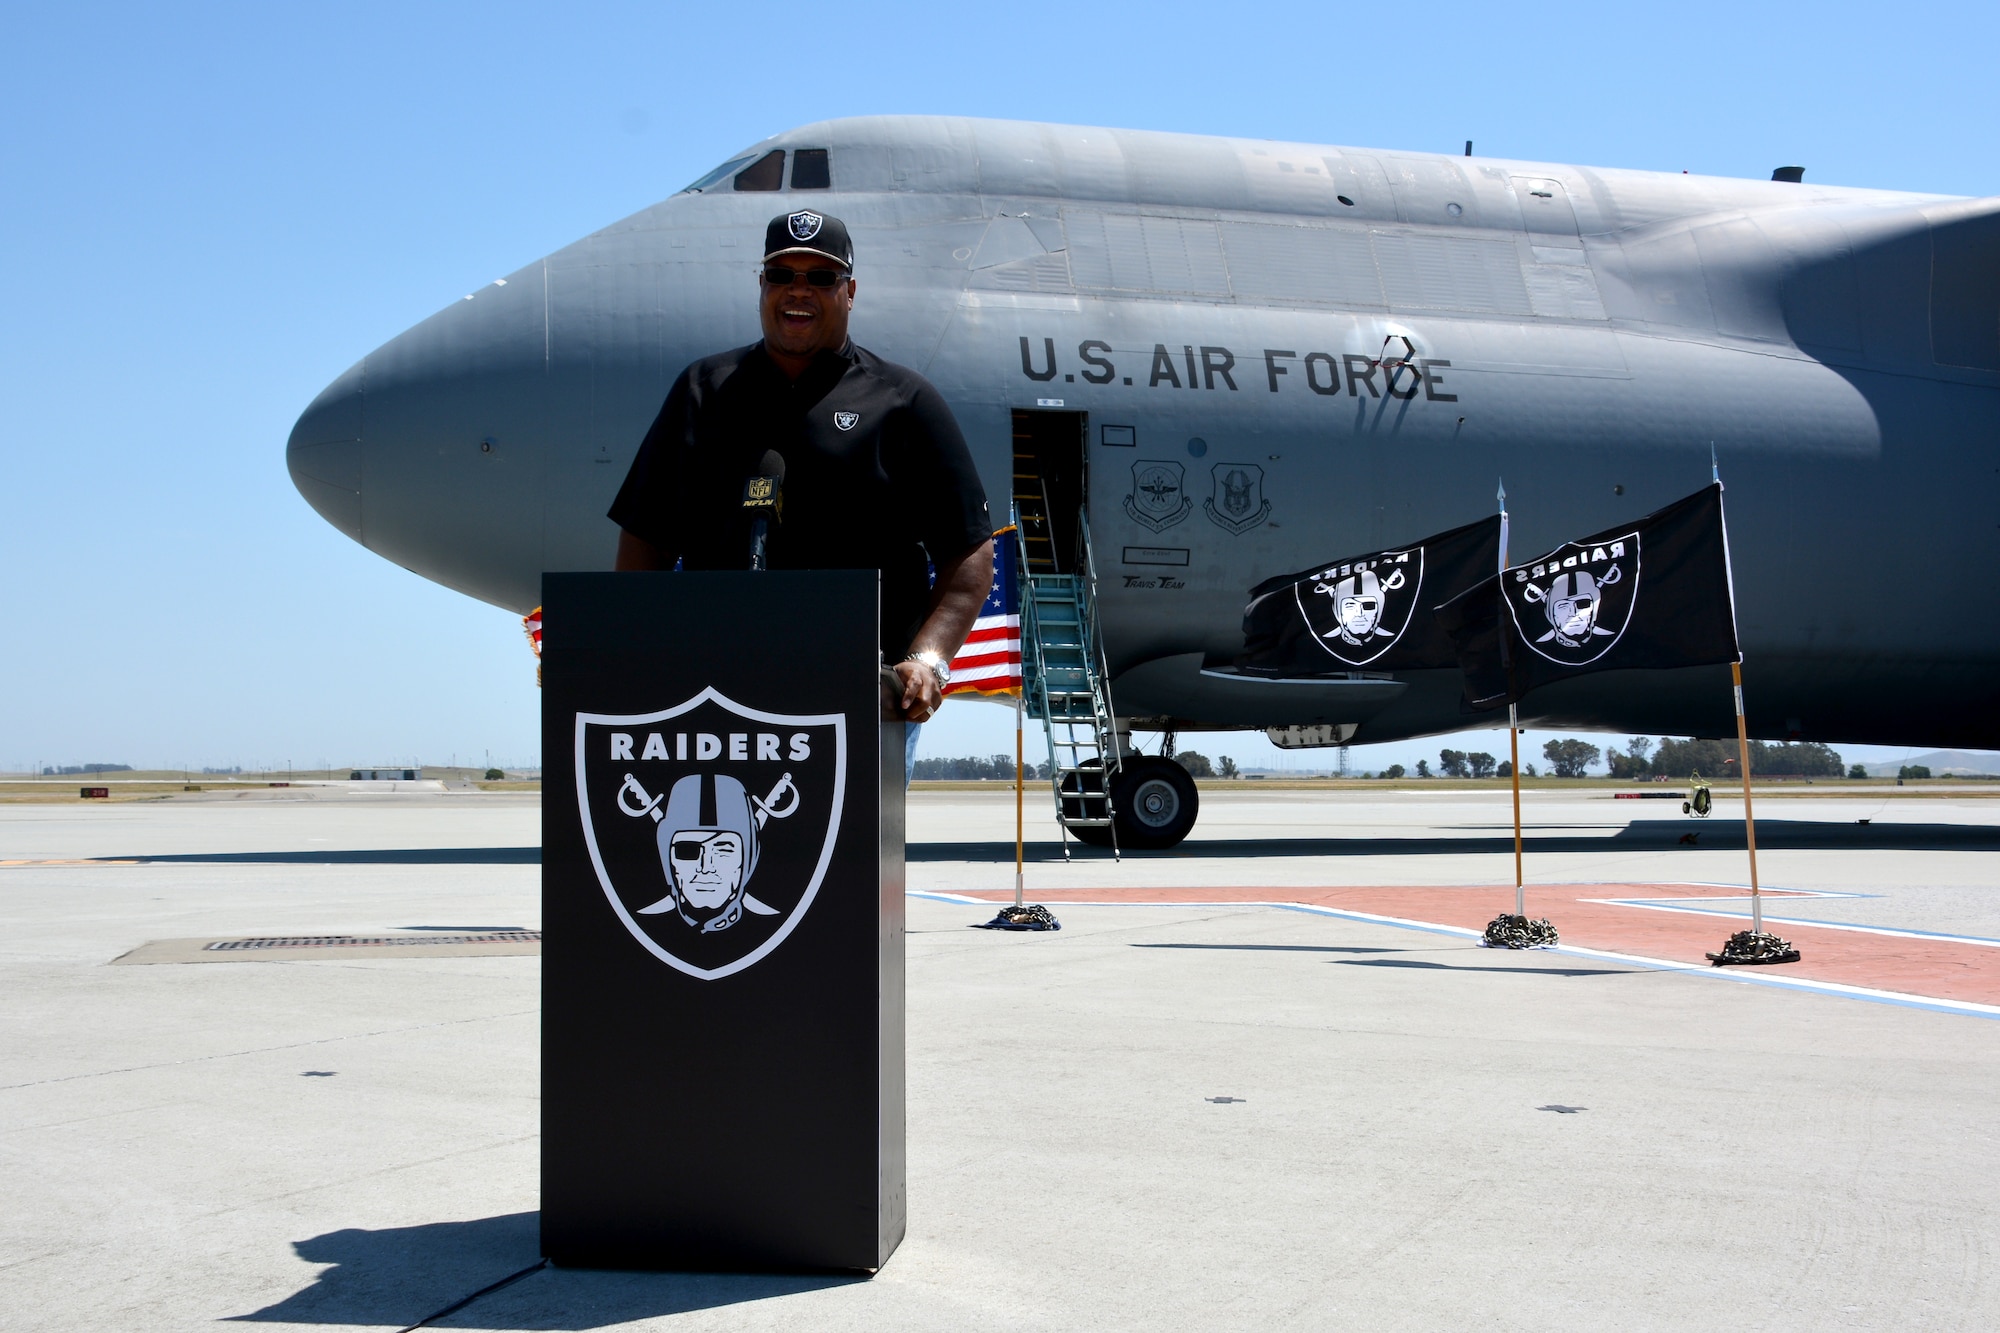 Lincoln Kennedy, Oakland Raider alumni, poses for a photo on flightline May 2, 2015, during Day 3 of the NFL Draft, at Travis Air Force Base, California. (U.S Air Force photo by Senior Airman Charles Rivezzo)